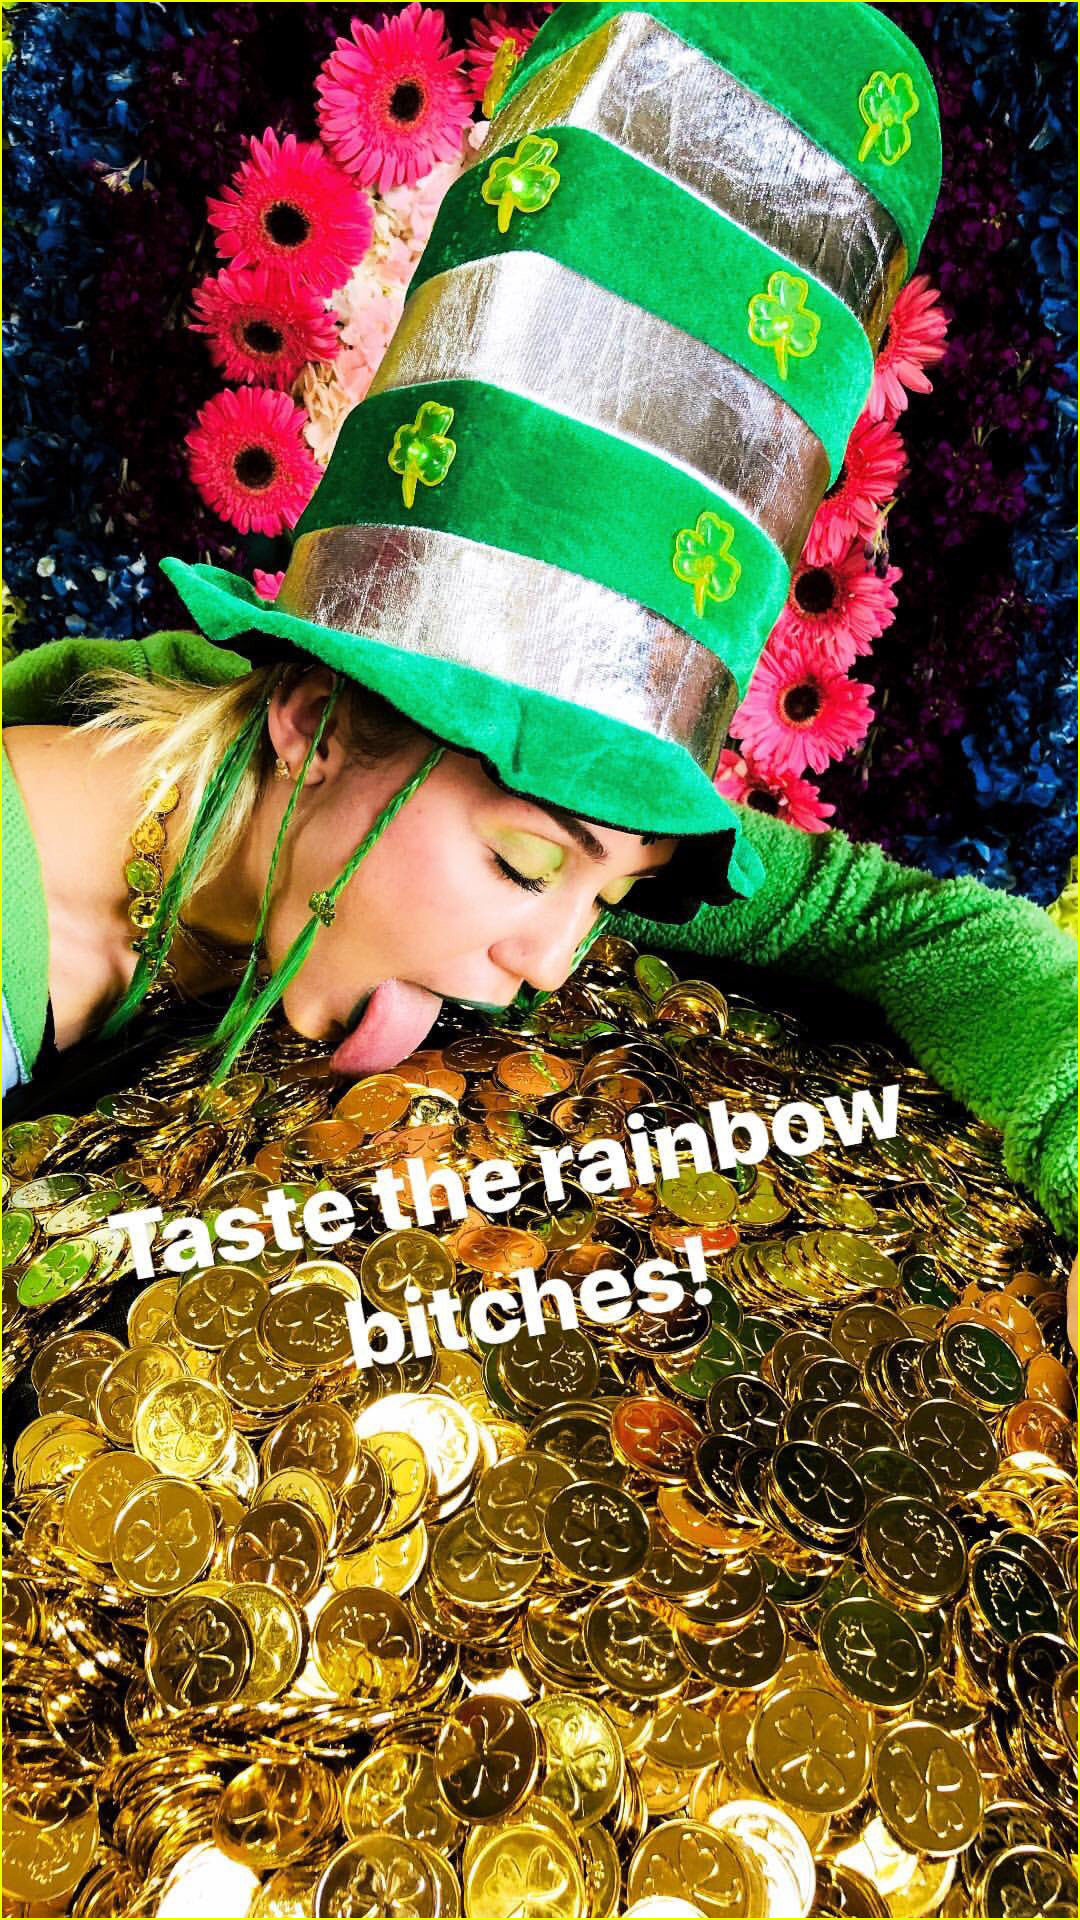 miley cyrus celebrates st patricks day with dfestive outfit 01